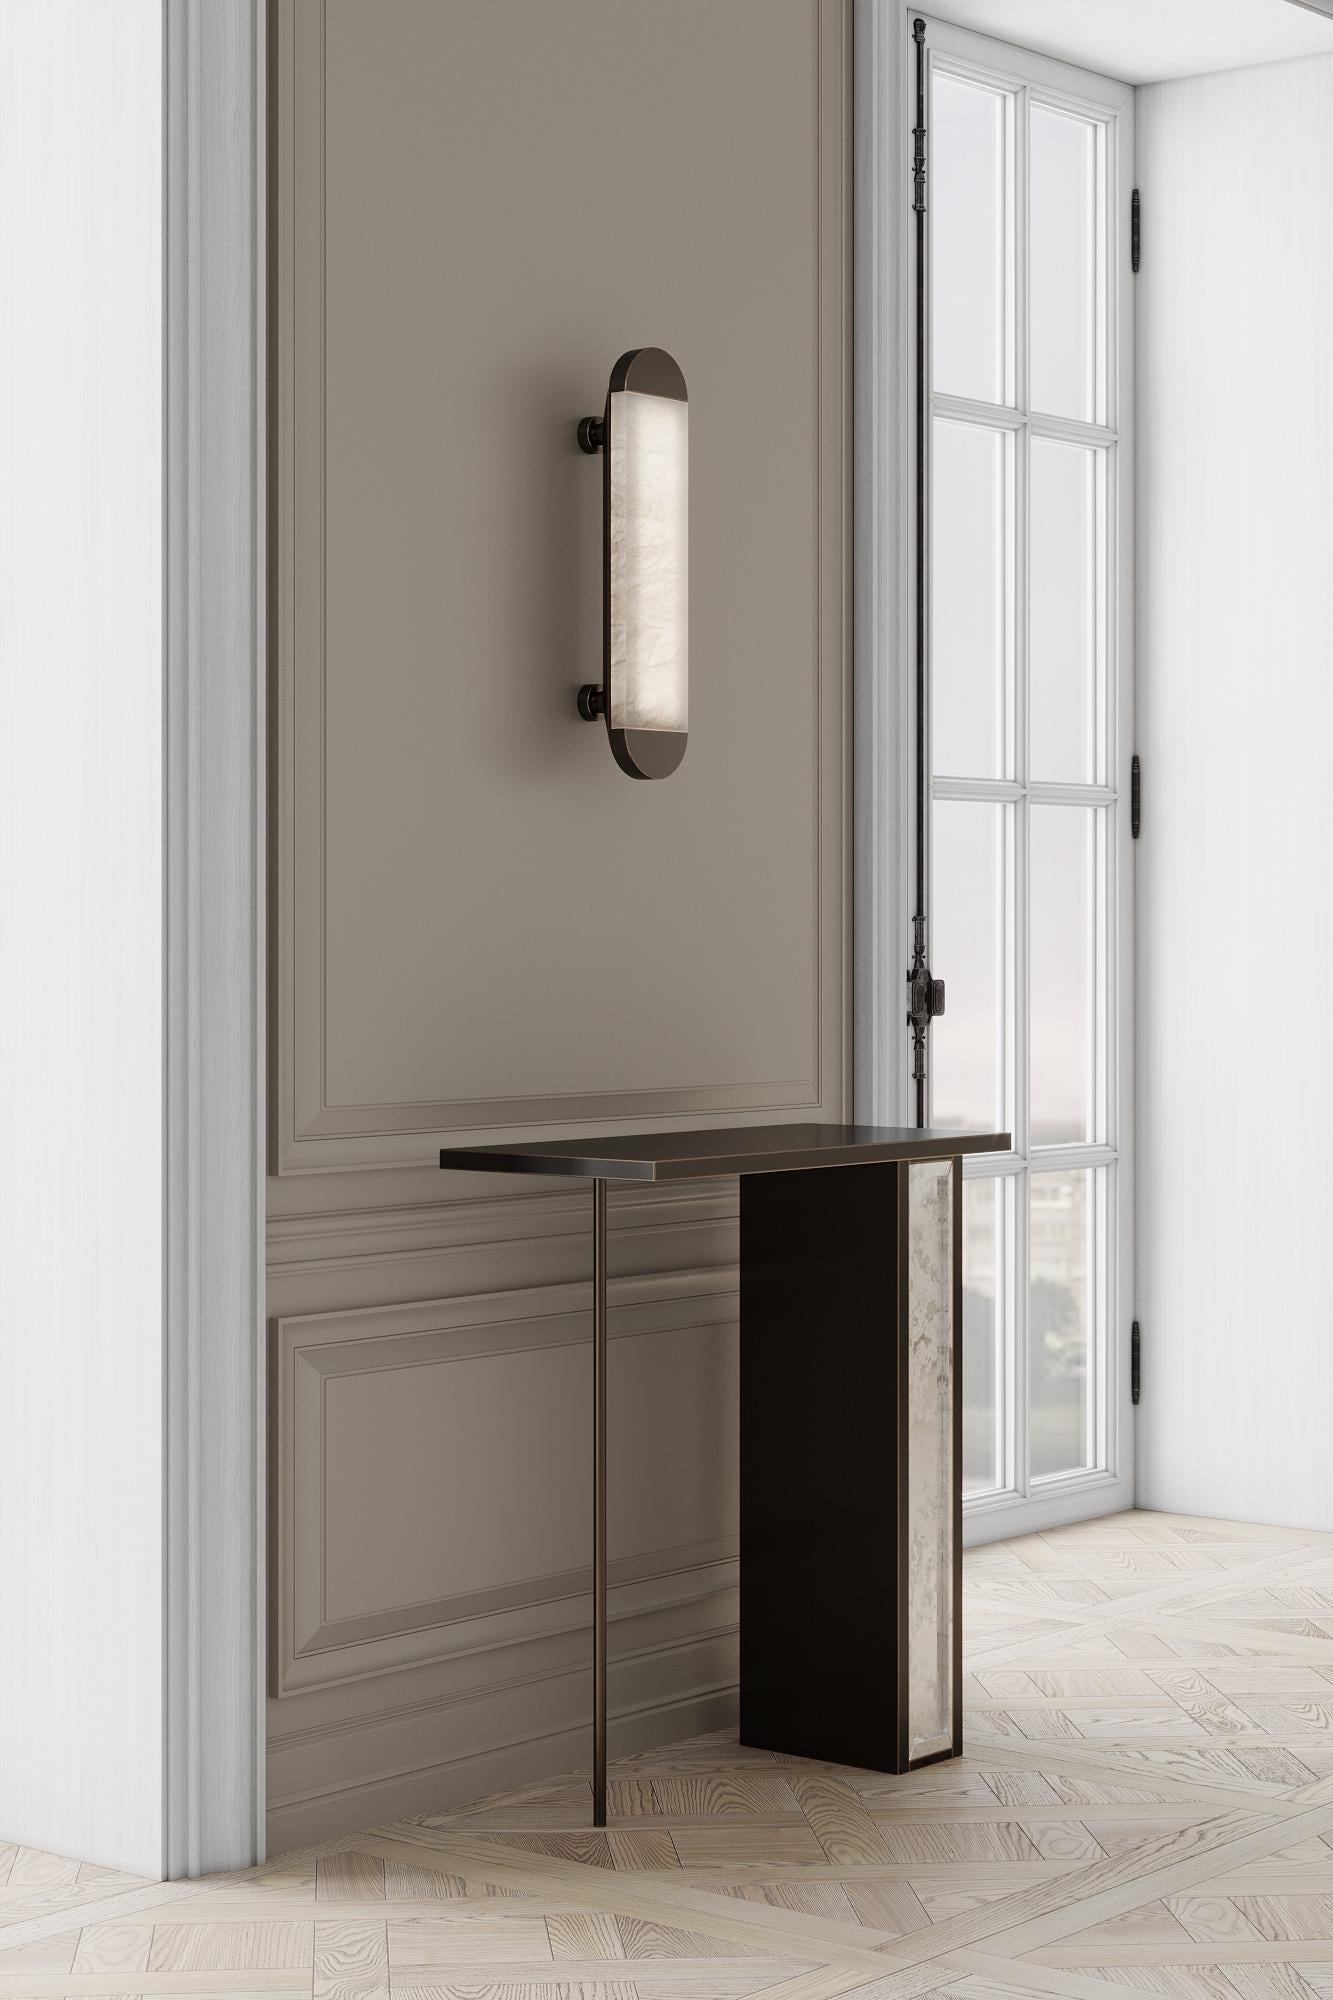 The silhouette console is designed by Emél & Browne in the Minimalist and contemporary style and custom made in Italy by skilled artisans.

The delicate vertical elements of the silhouette console table resemble slender figures on the horizon